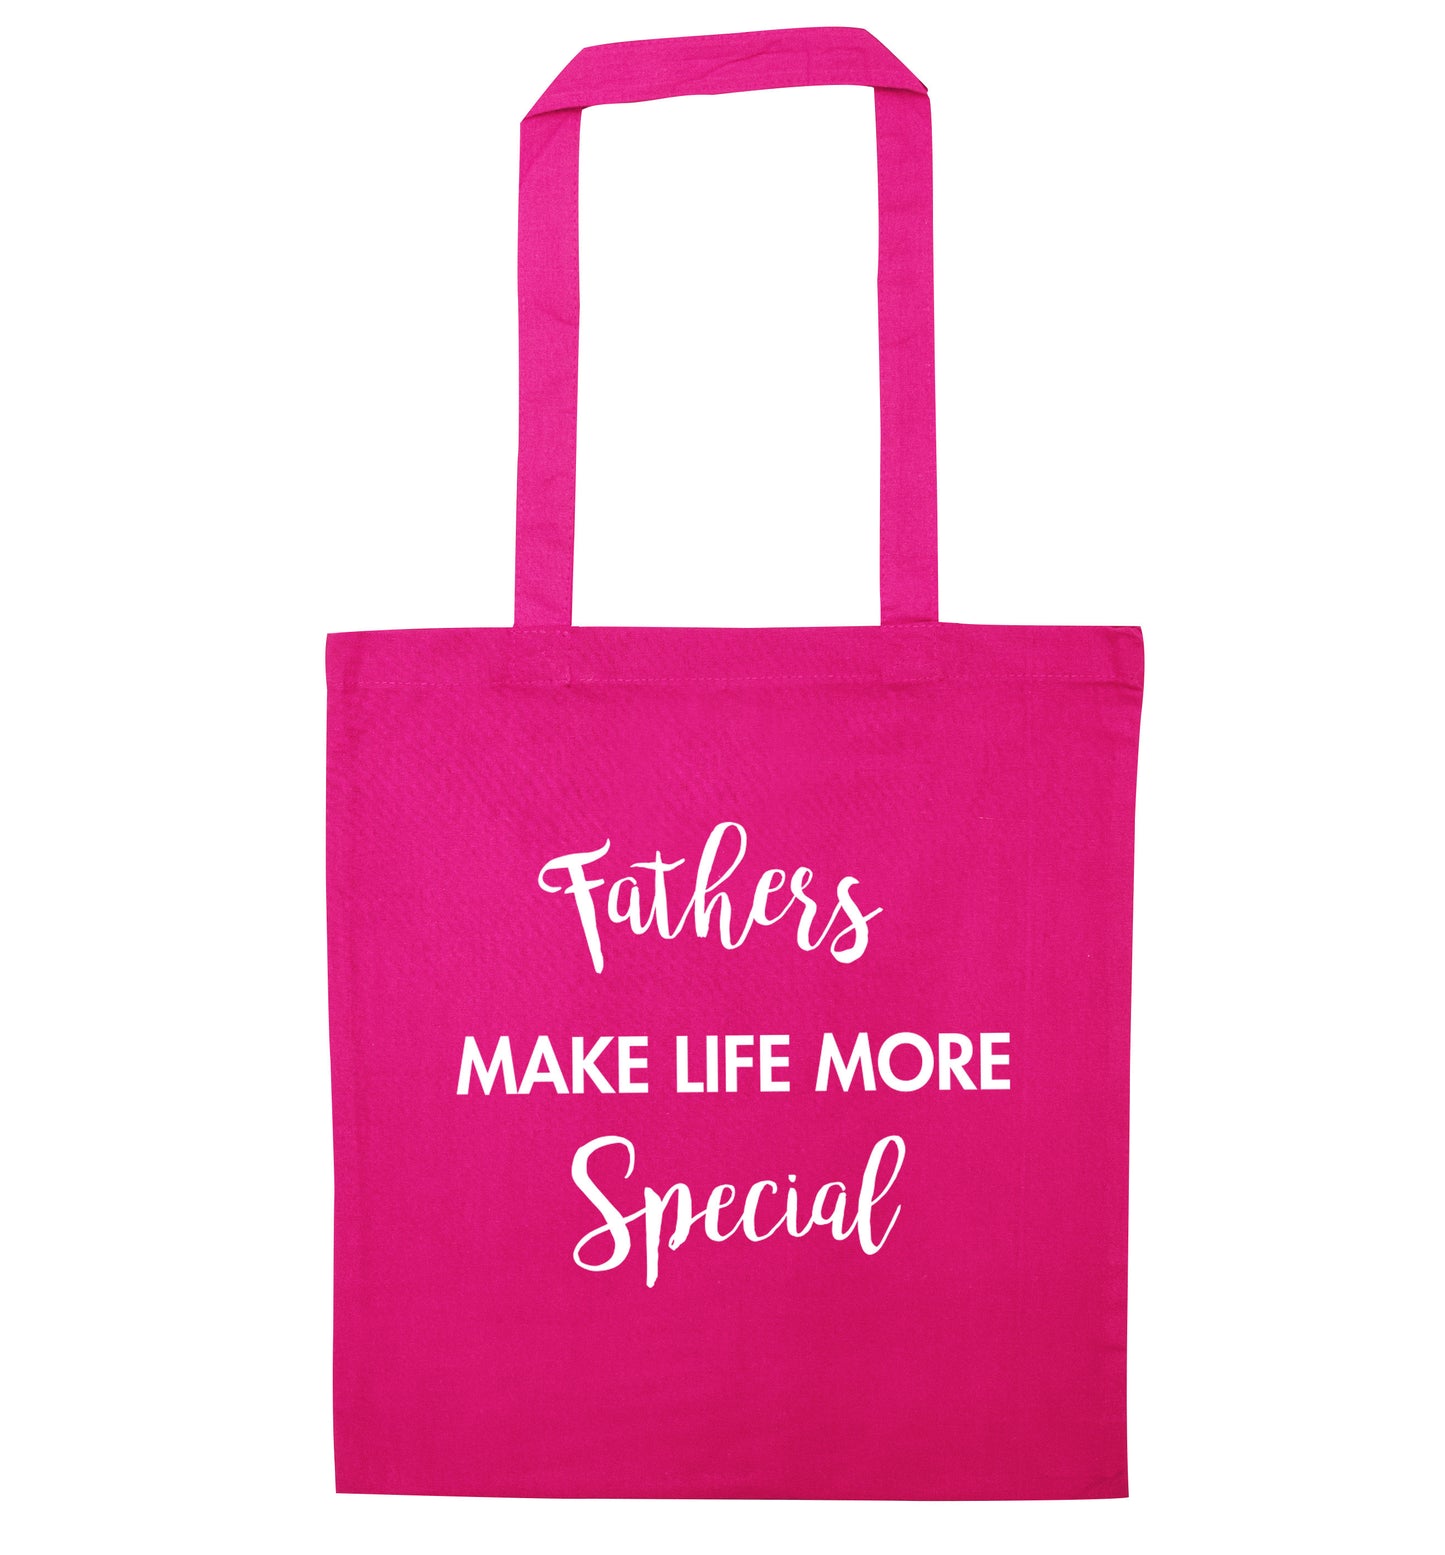 Fathers make life more special pink tote bag